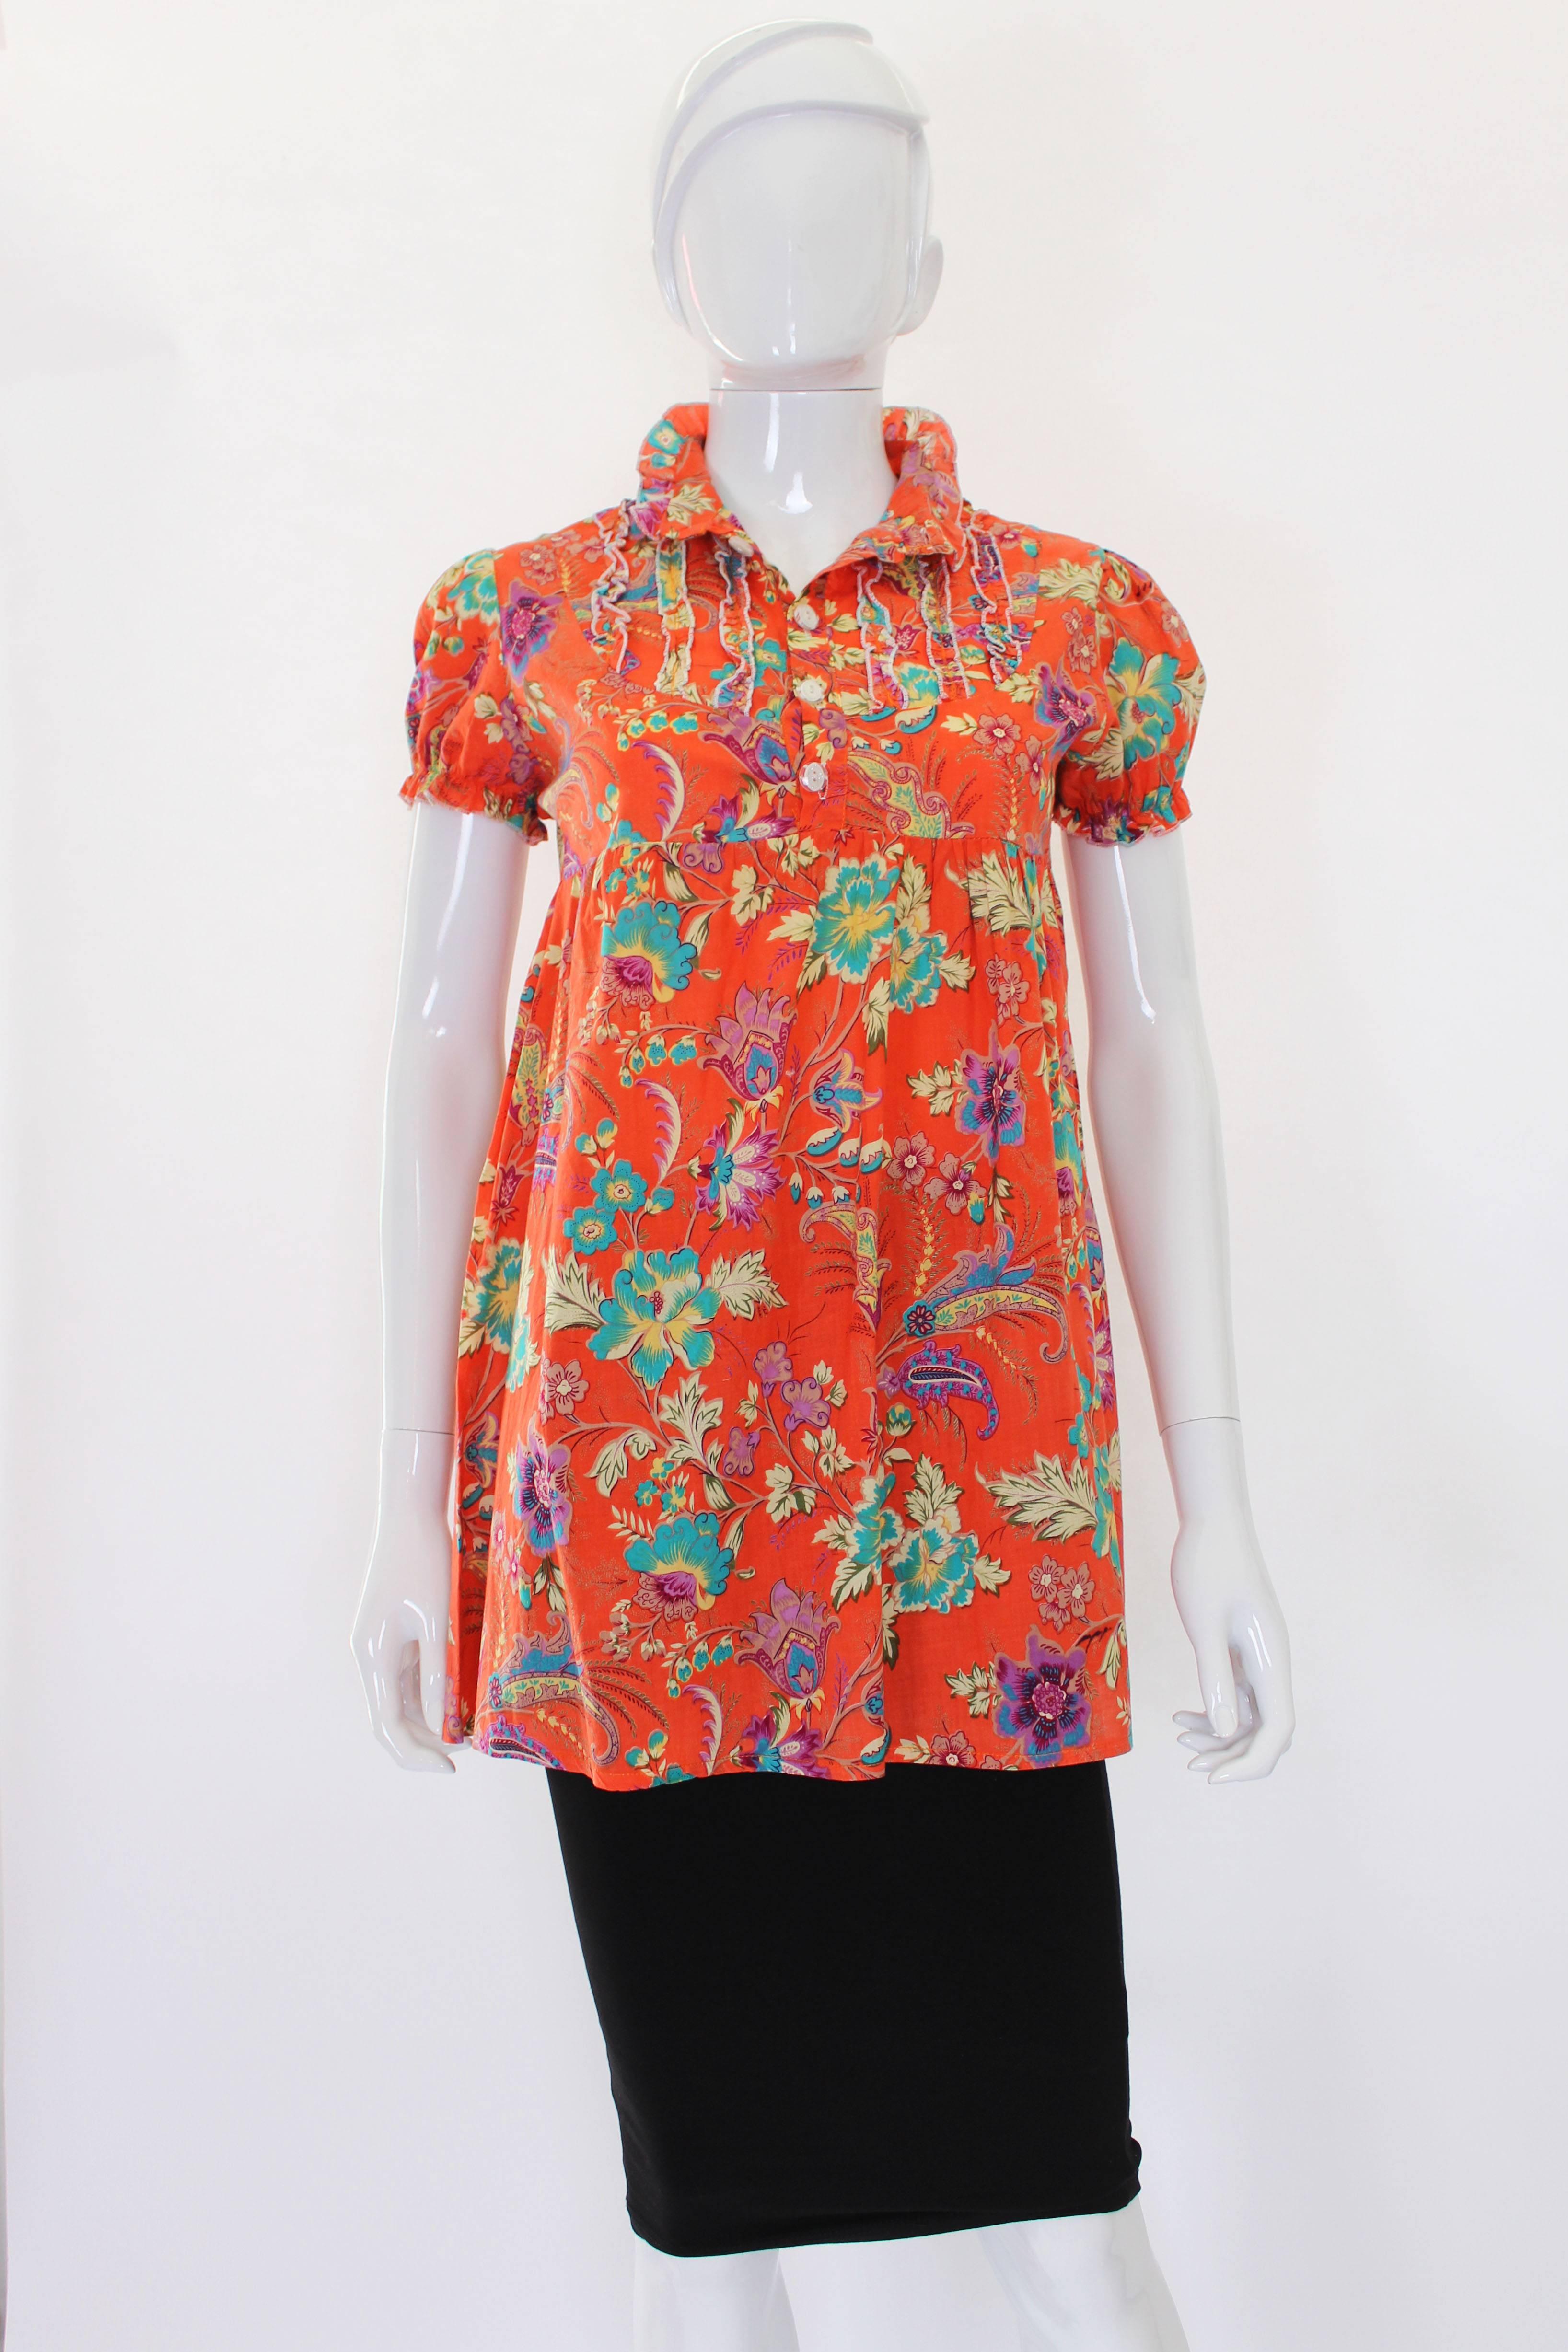 This blouse is made of a soft light wieght cotton with a colourful floral print on an orange background. The blouse is in a baby doll style shape. It has a small stand up collar that sits around the neck when the buttons are done up but can be worn